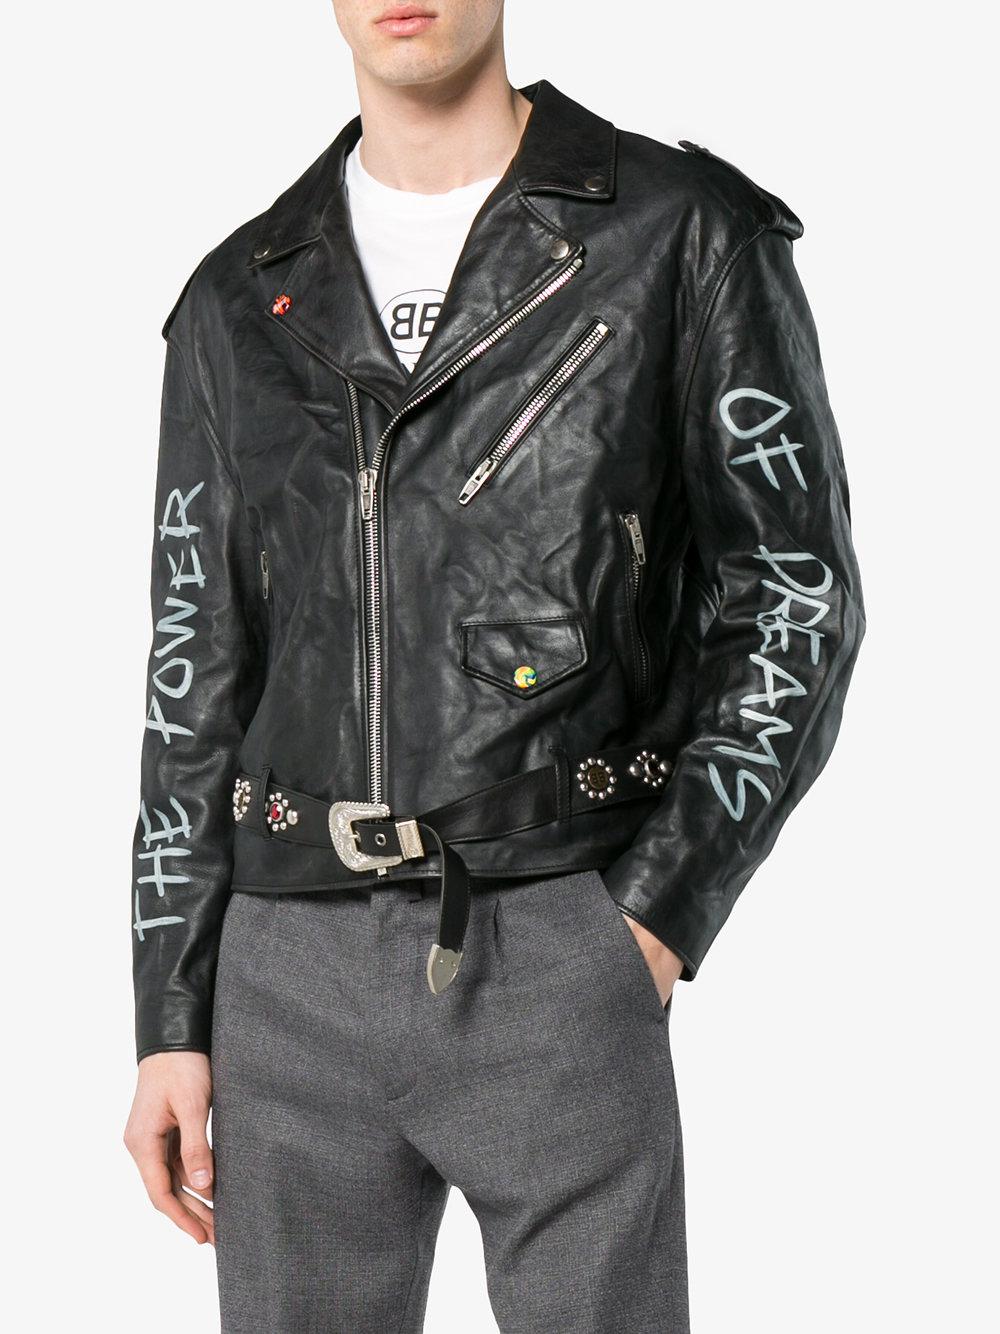 Balenciaga The Power Of Dreams Leather Jacket in Black for Men | Lyst